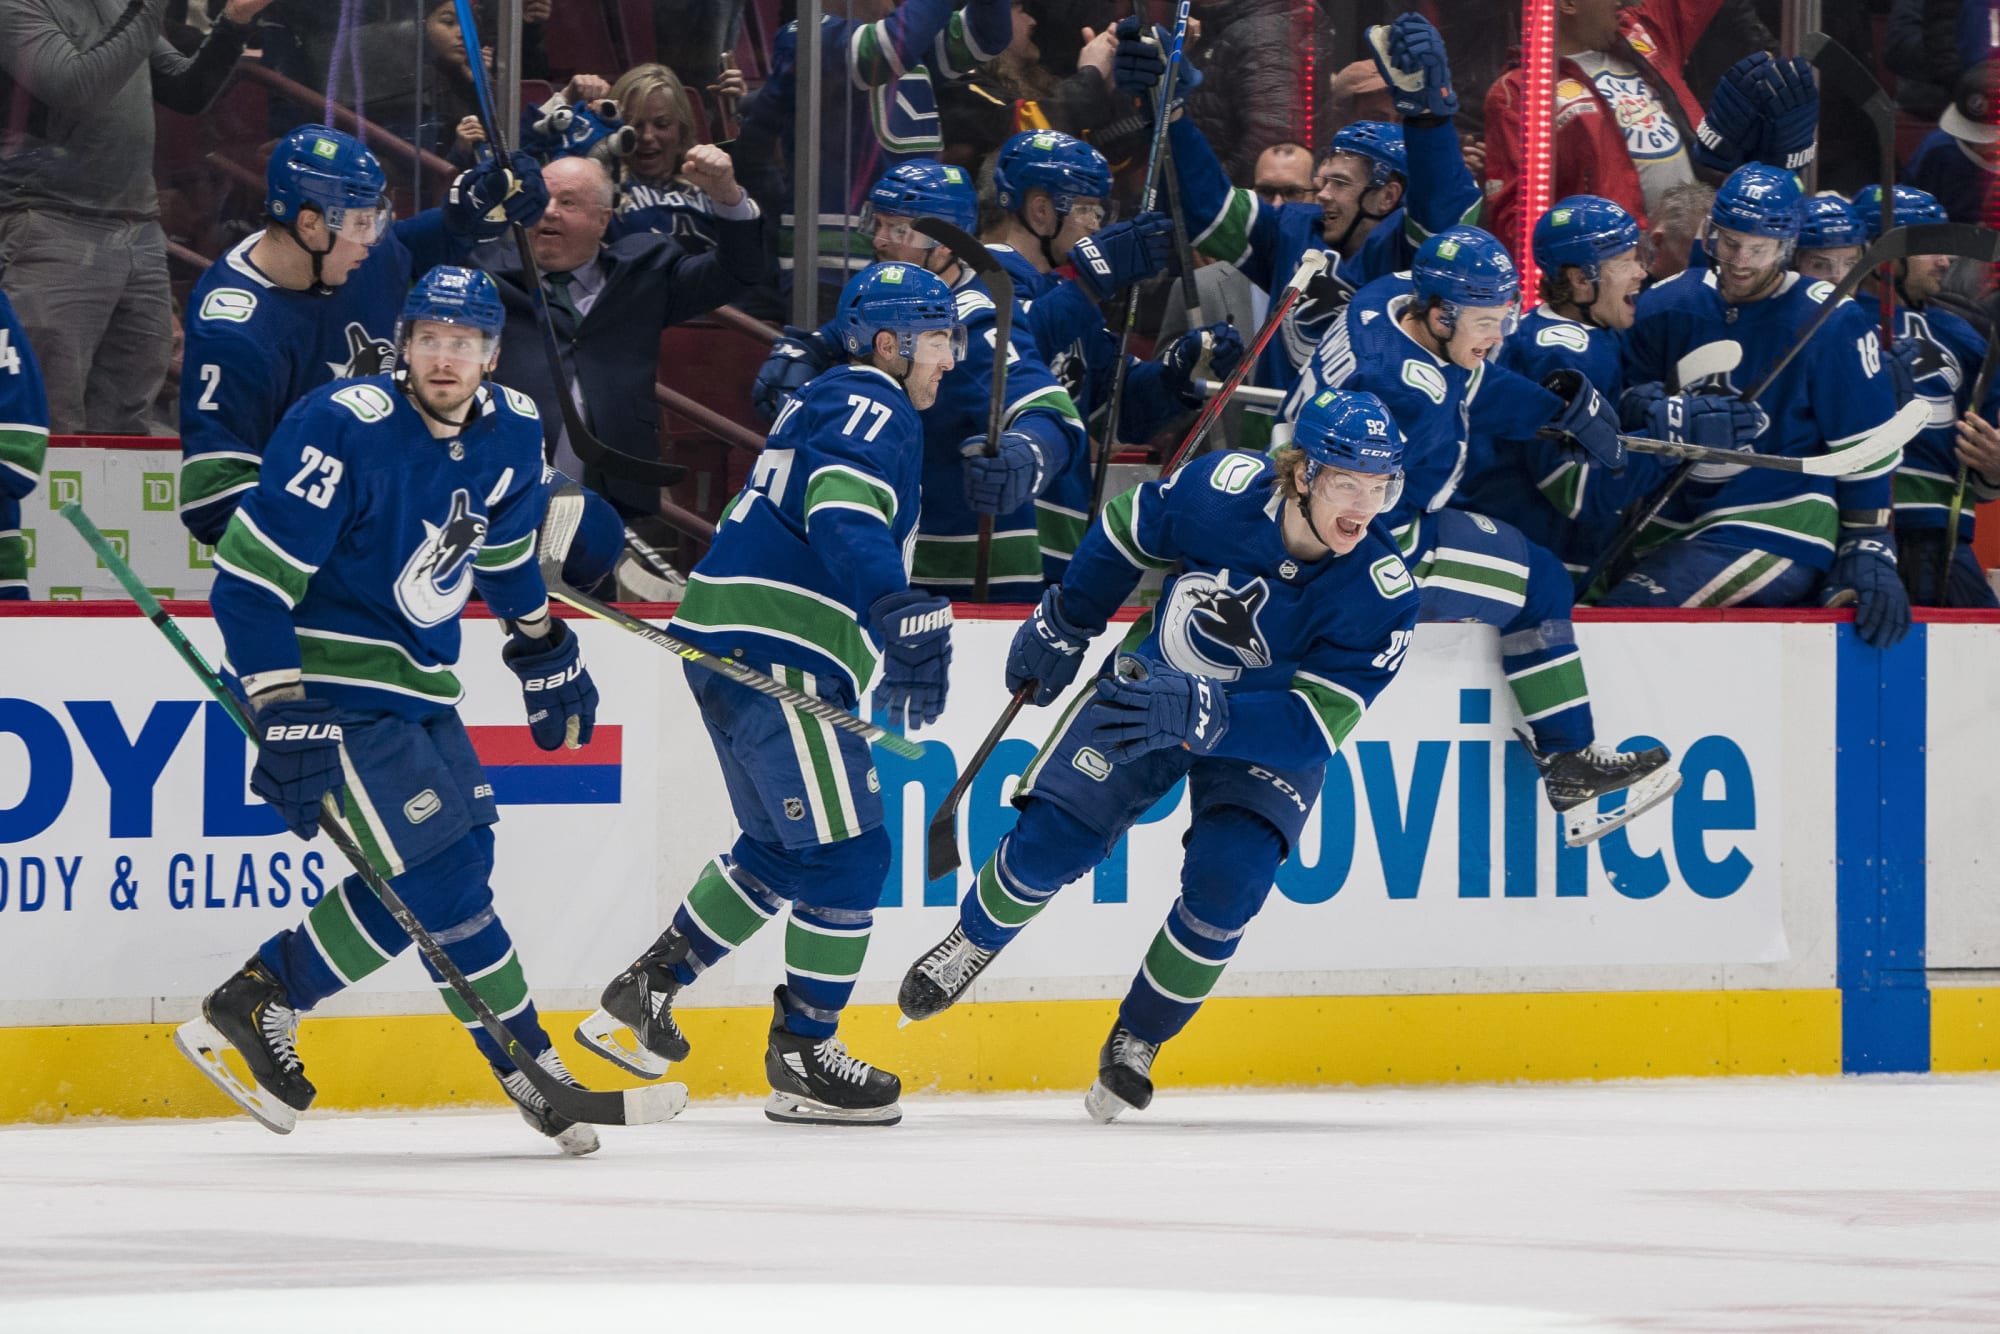 Will the Canucks make the 2021 Playoffs? Opinions are split